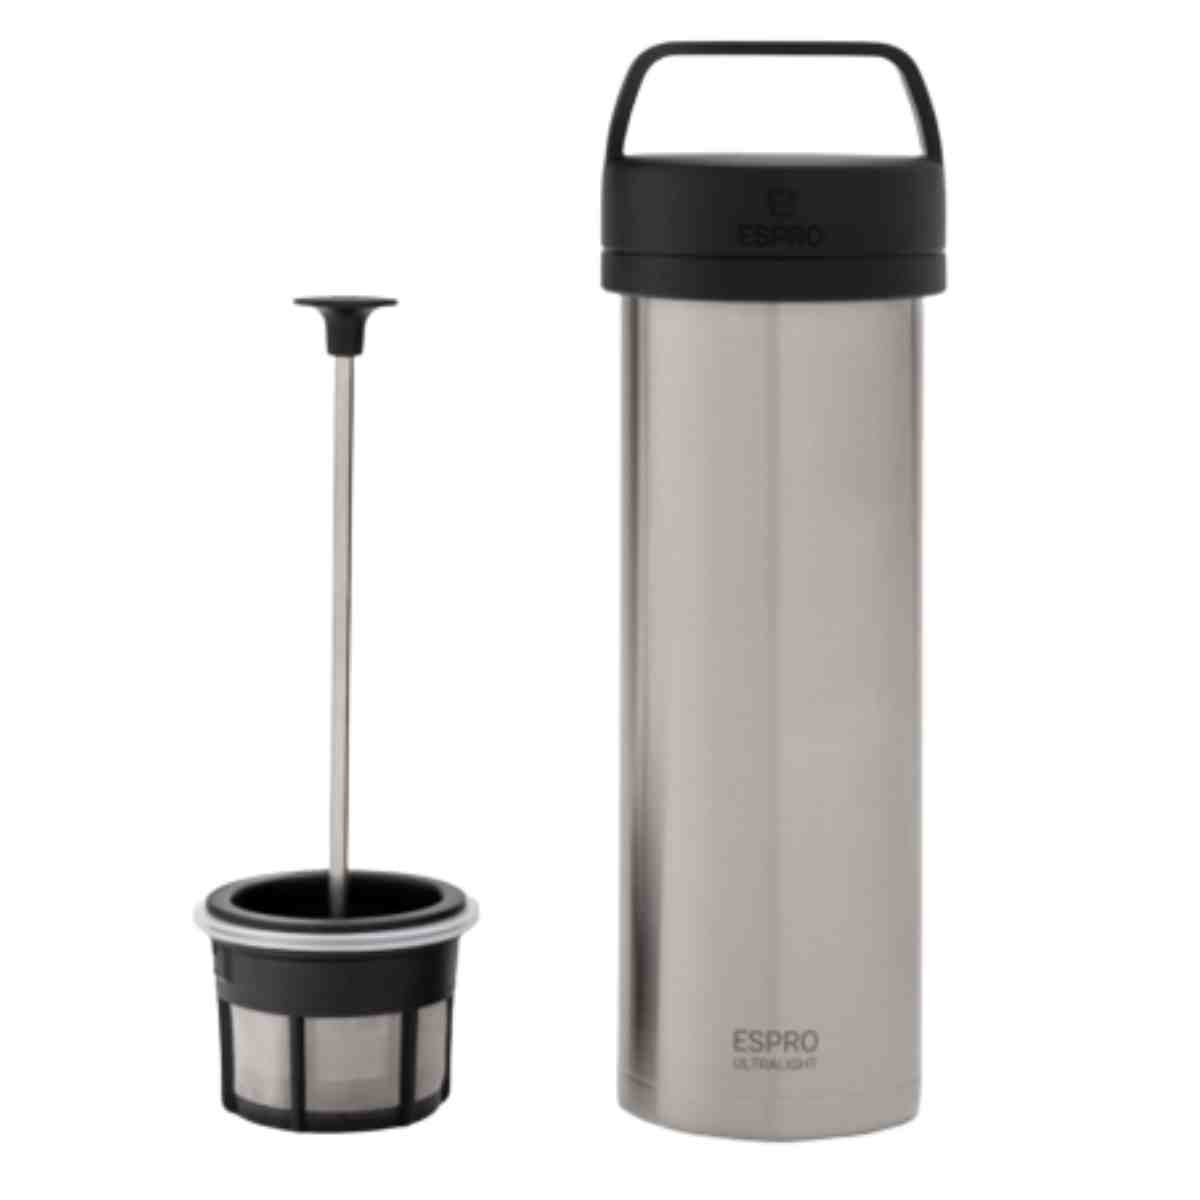 Outdoor Campgrounds French Press